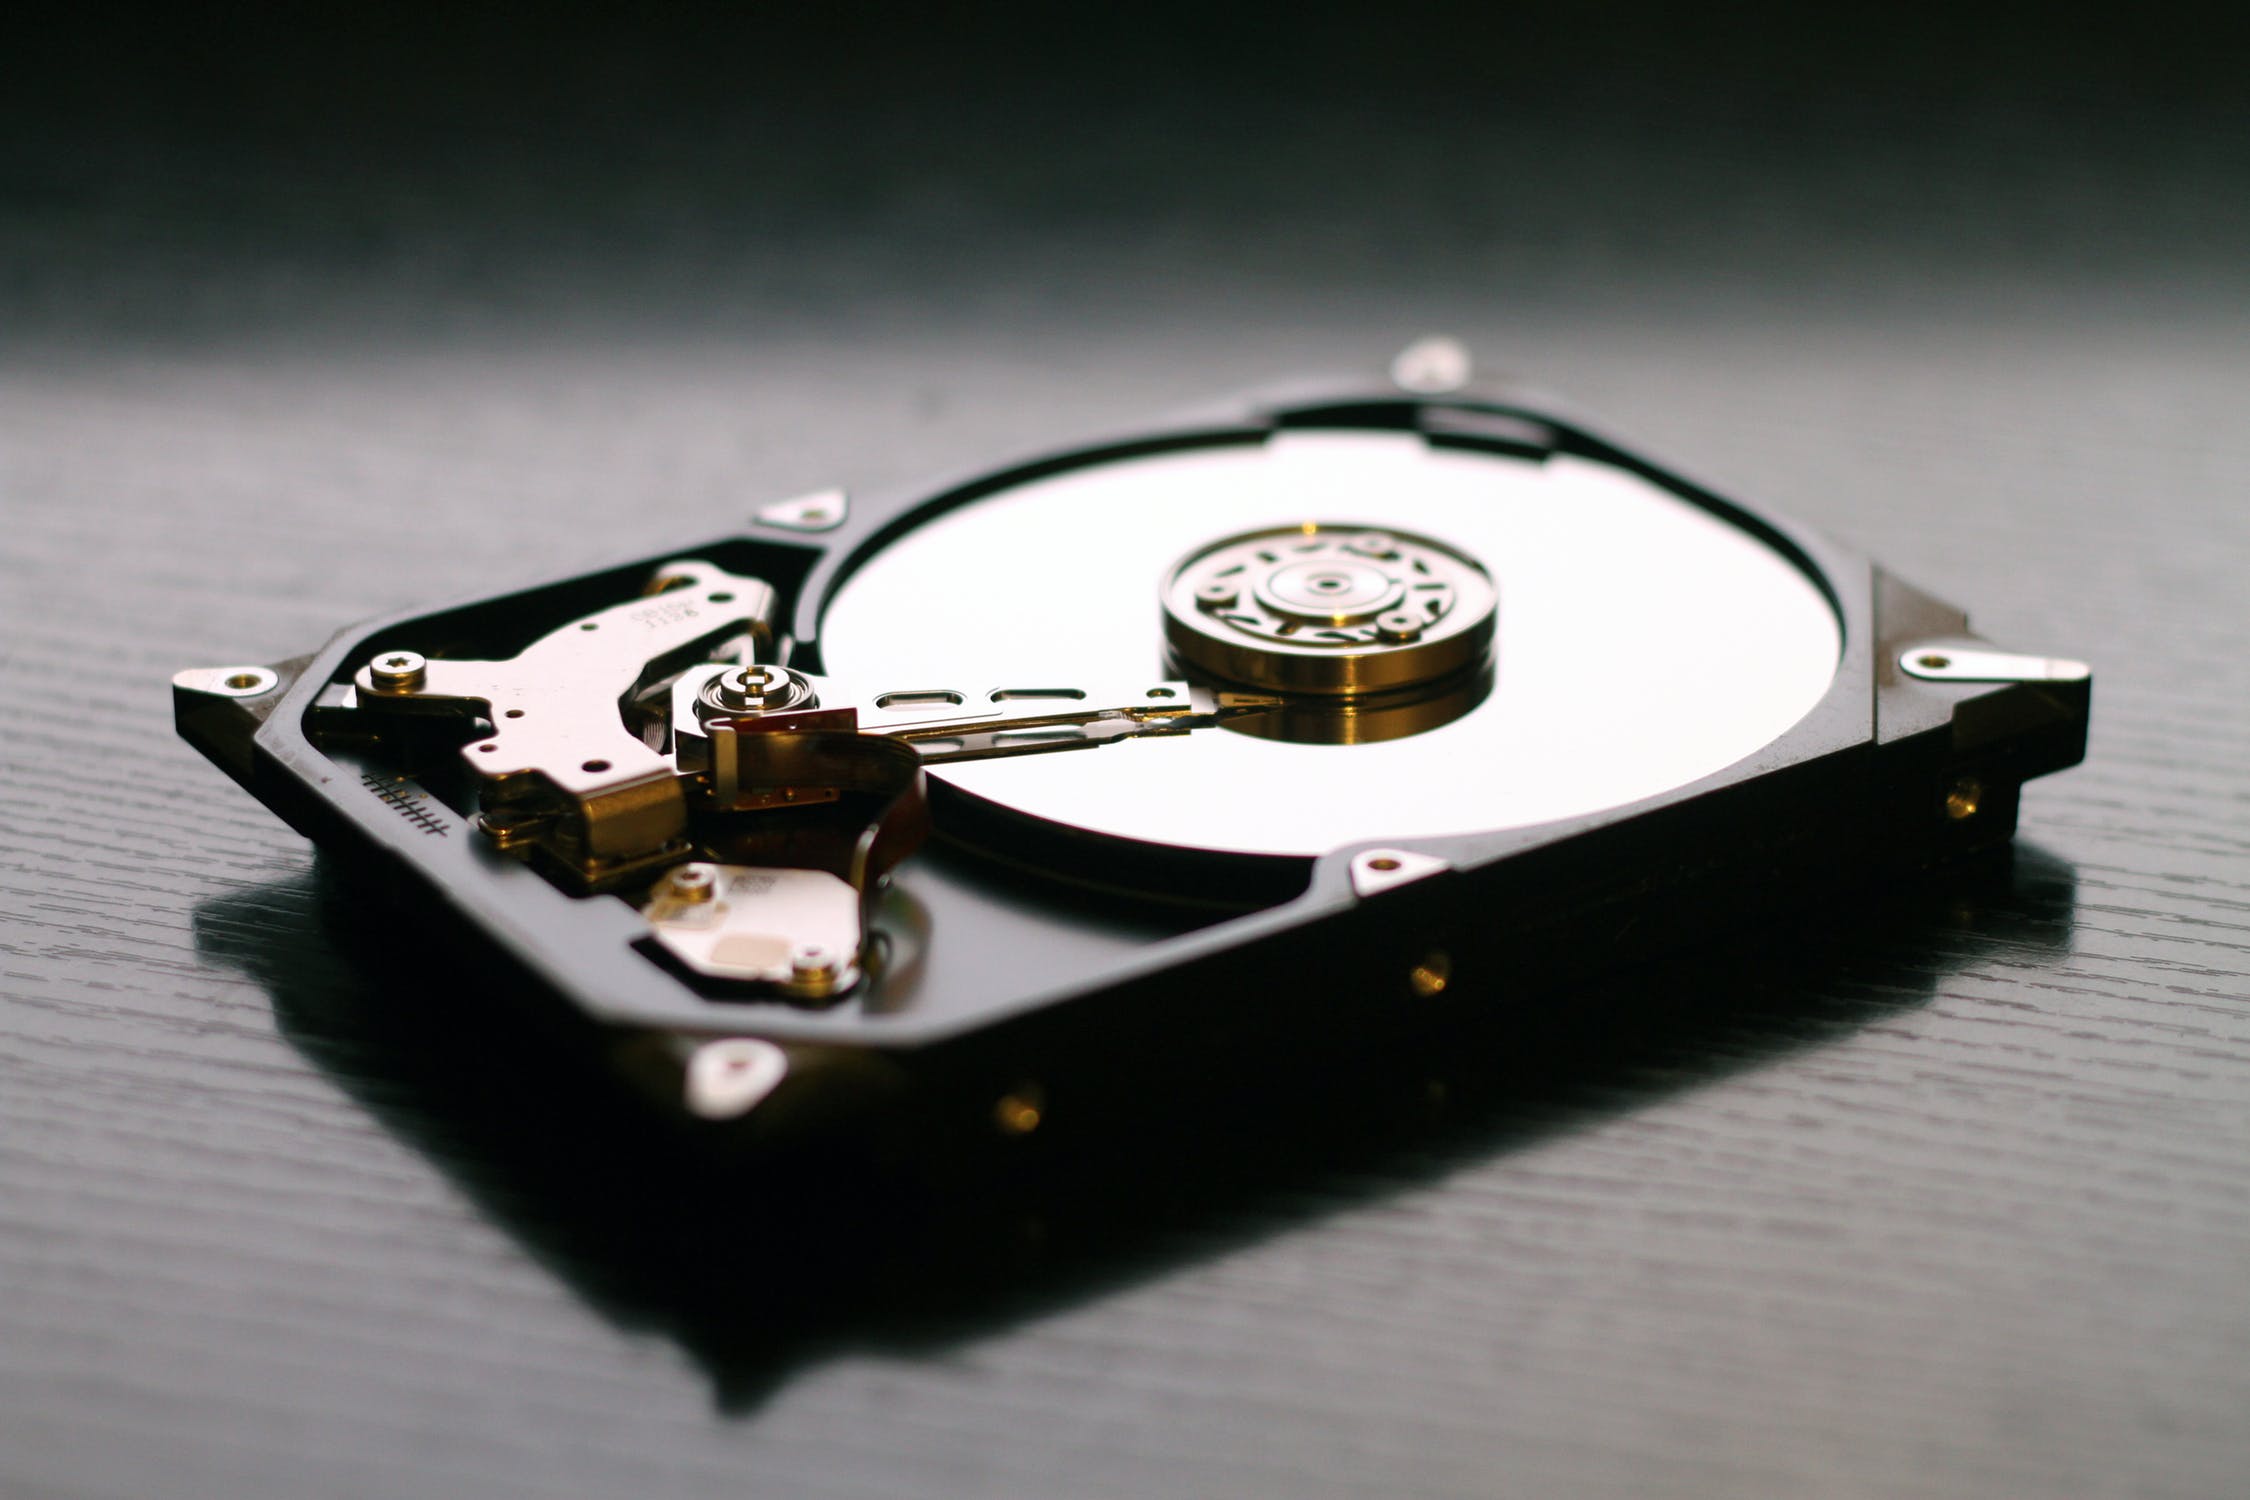 How to defrag your hard drive